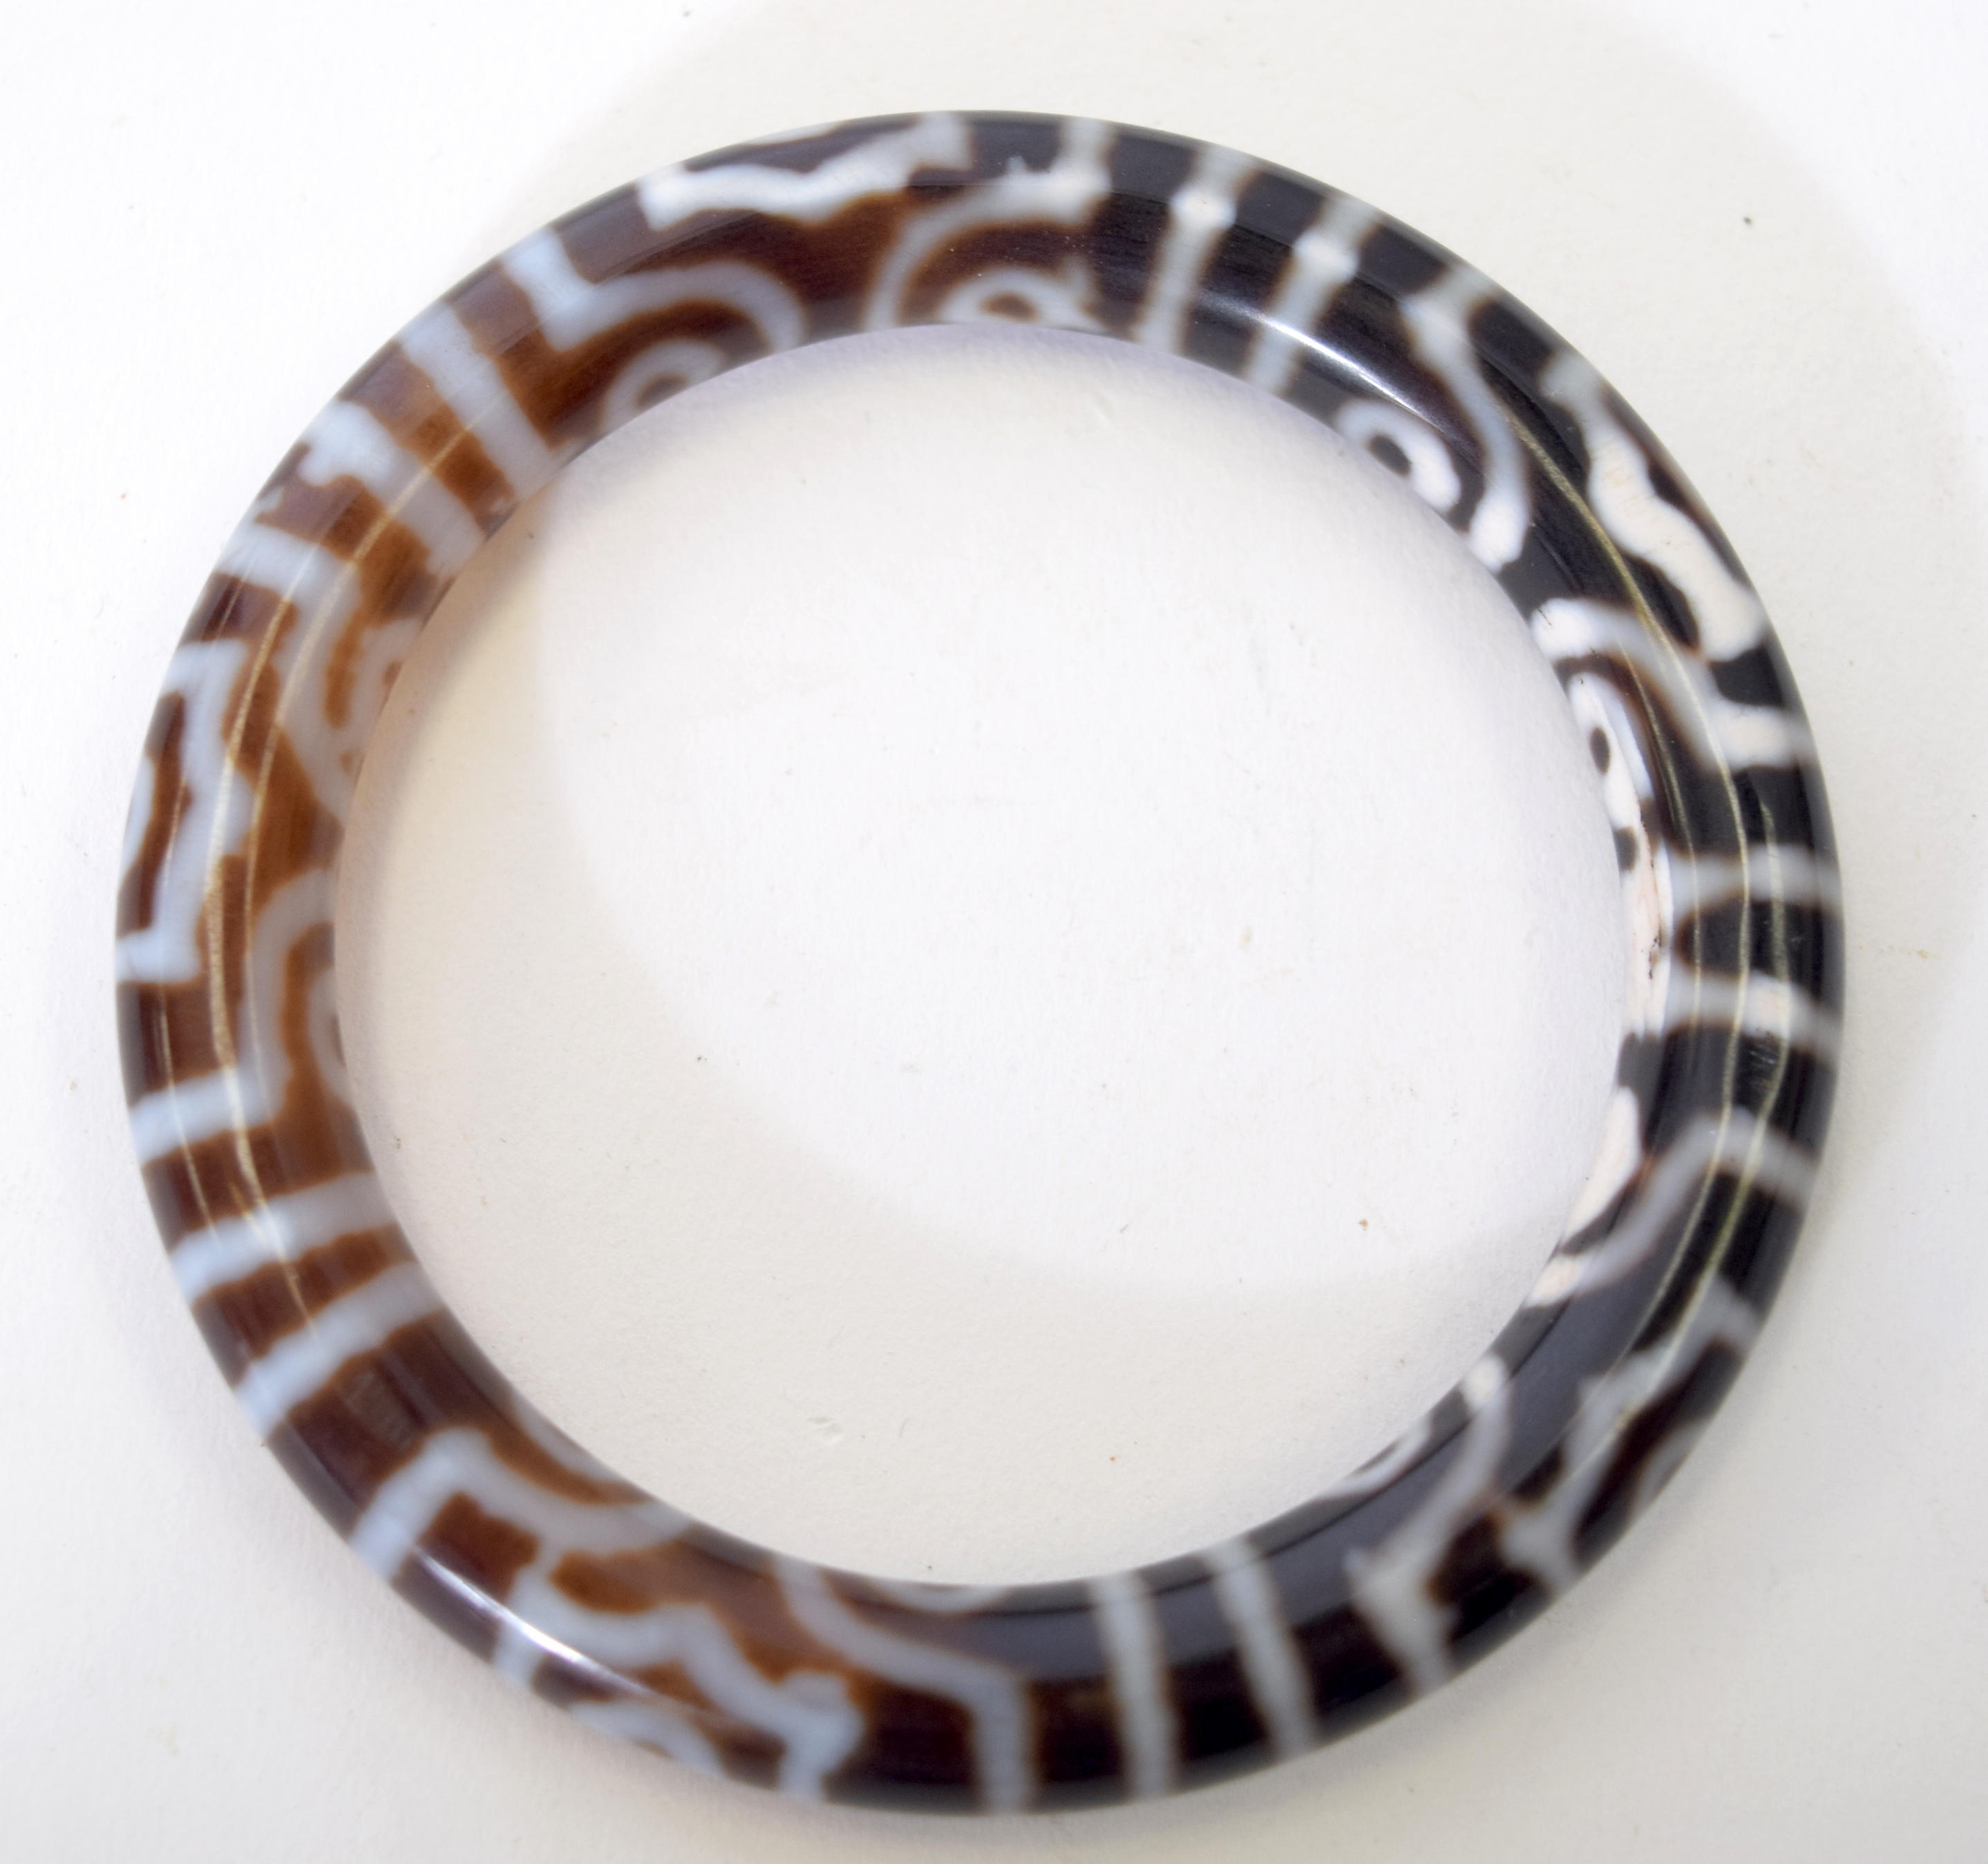 AN EARLY 20TH CENTURY TIBETAN AGATE BANGLE, decorated with symbols. 8.5 cm wide.